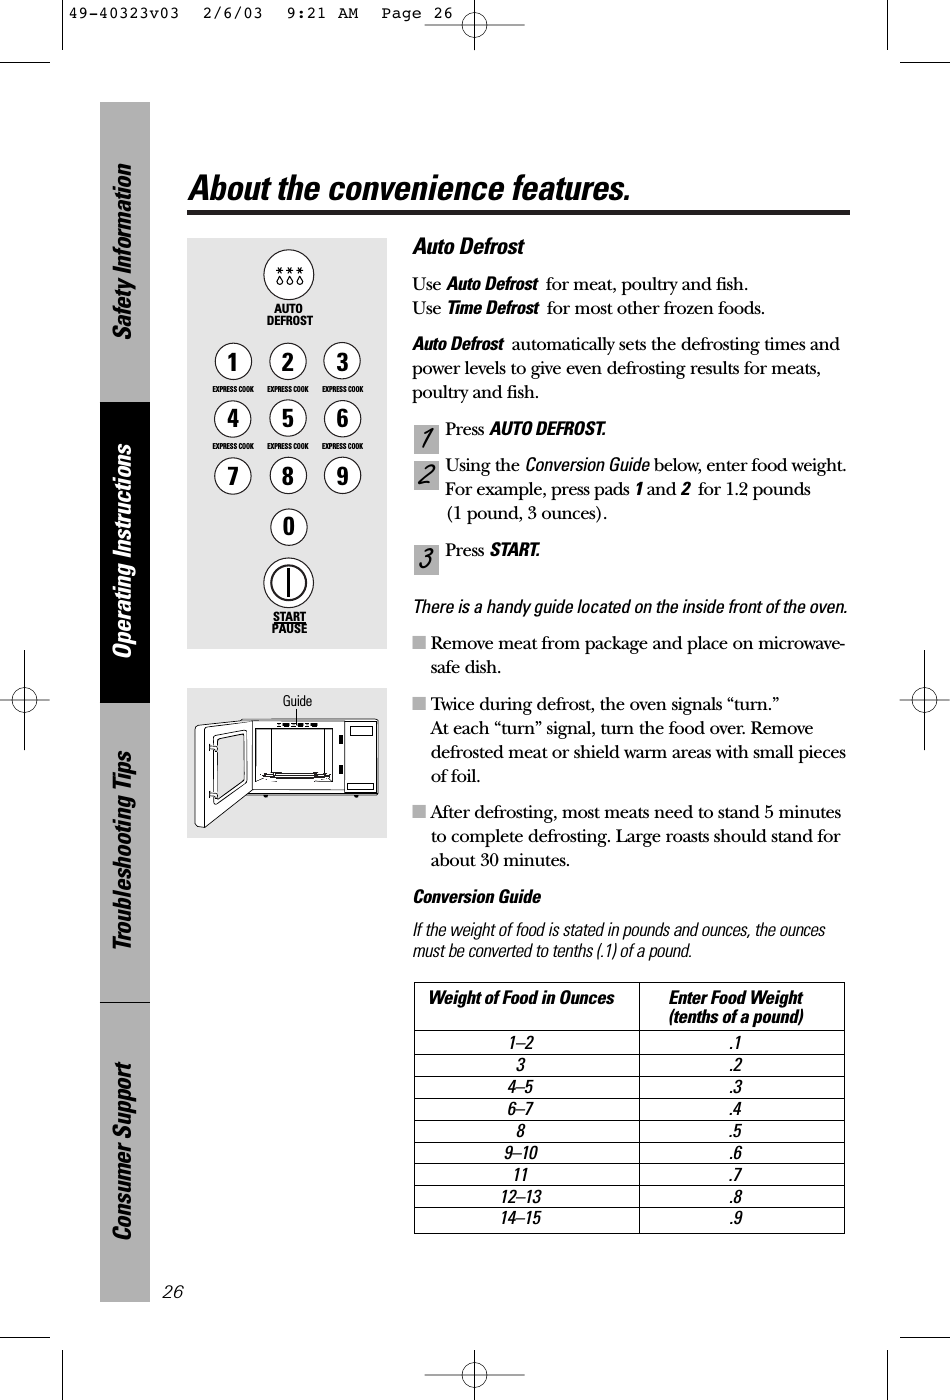 Safety InformationOperating InstructionsTroubleshooting TipsConsumer SupportAbout the convenience features.26Auto DefrostUse Auto Defrost for meat, poultry and fish. Use Time Defrost for most other frozen foods.Auto Defrost automatically sets the defrosting times andpower levels to give even defrosting results for meats,poultry and fish.Press AUTO DEFROST.Using the Conversion Guide below, enter food weight.For example, press pads 1and 2for 1.2 pounds (1 pound, 3 ounces).Press START.There is a handy guide located on the inside front of the oven. ■Remove meat from package and place on microwave-safe dish.■Twice during defrost, the oven signals “turn.”At each “turn” signal, turn the food over. Removedefrosted meat or shield warm areas with small piecesof foil.■After defrosting, most meats need to stand 5 minutesto complete defrosting. Large roasts should stand forabout 30 minutes.Conversion GuideIf the weight of food is stated in pounds and ounces, the ouncesmust be converted to tenths (.1) of a pound.Weight of Food in Ounces Enter Food Weight(tenths of a pound)1–2 .13.24–5 .36–7 .48.59–10 .611 .712–13 .814–15 .9321STARTPAUSE1EXPRESS COOK3EXPRESS COOK2EXPRESS COOK5EXPRESS COOK6EXPRESS COOK78904EXPRESS COOKAUTO DEFROSTGuide49-40323v03  2/6/03  9:21 AM  Page 26